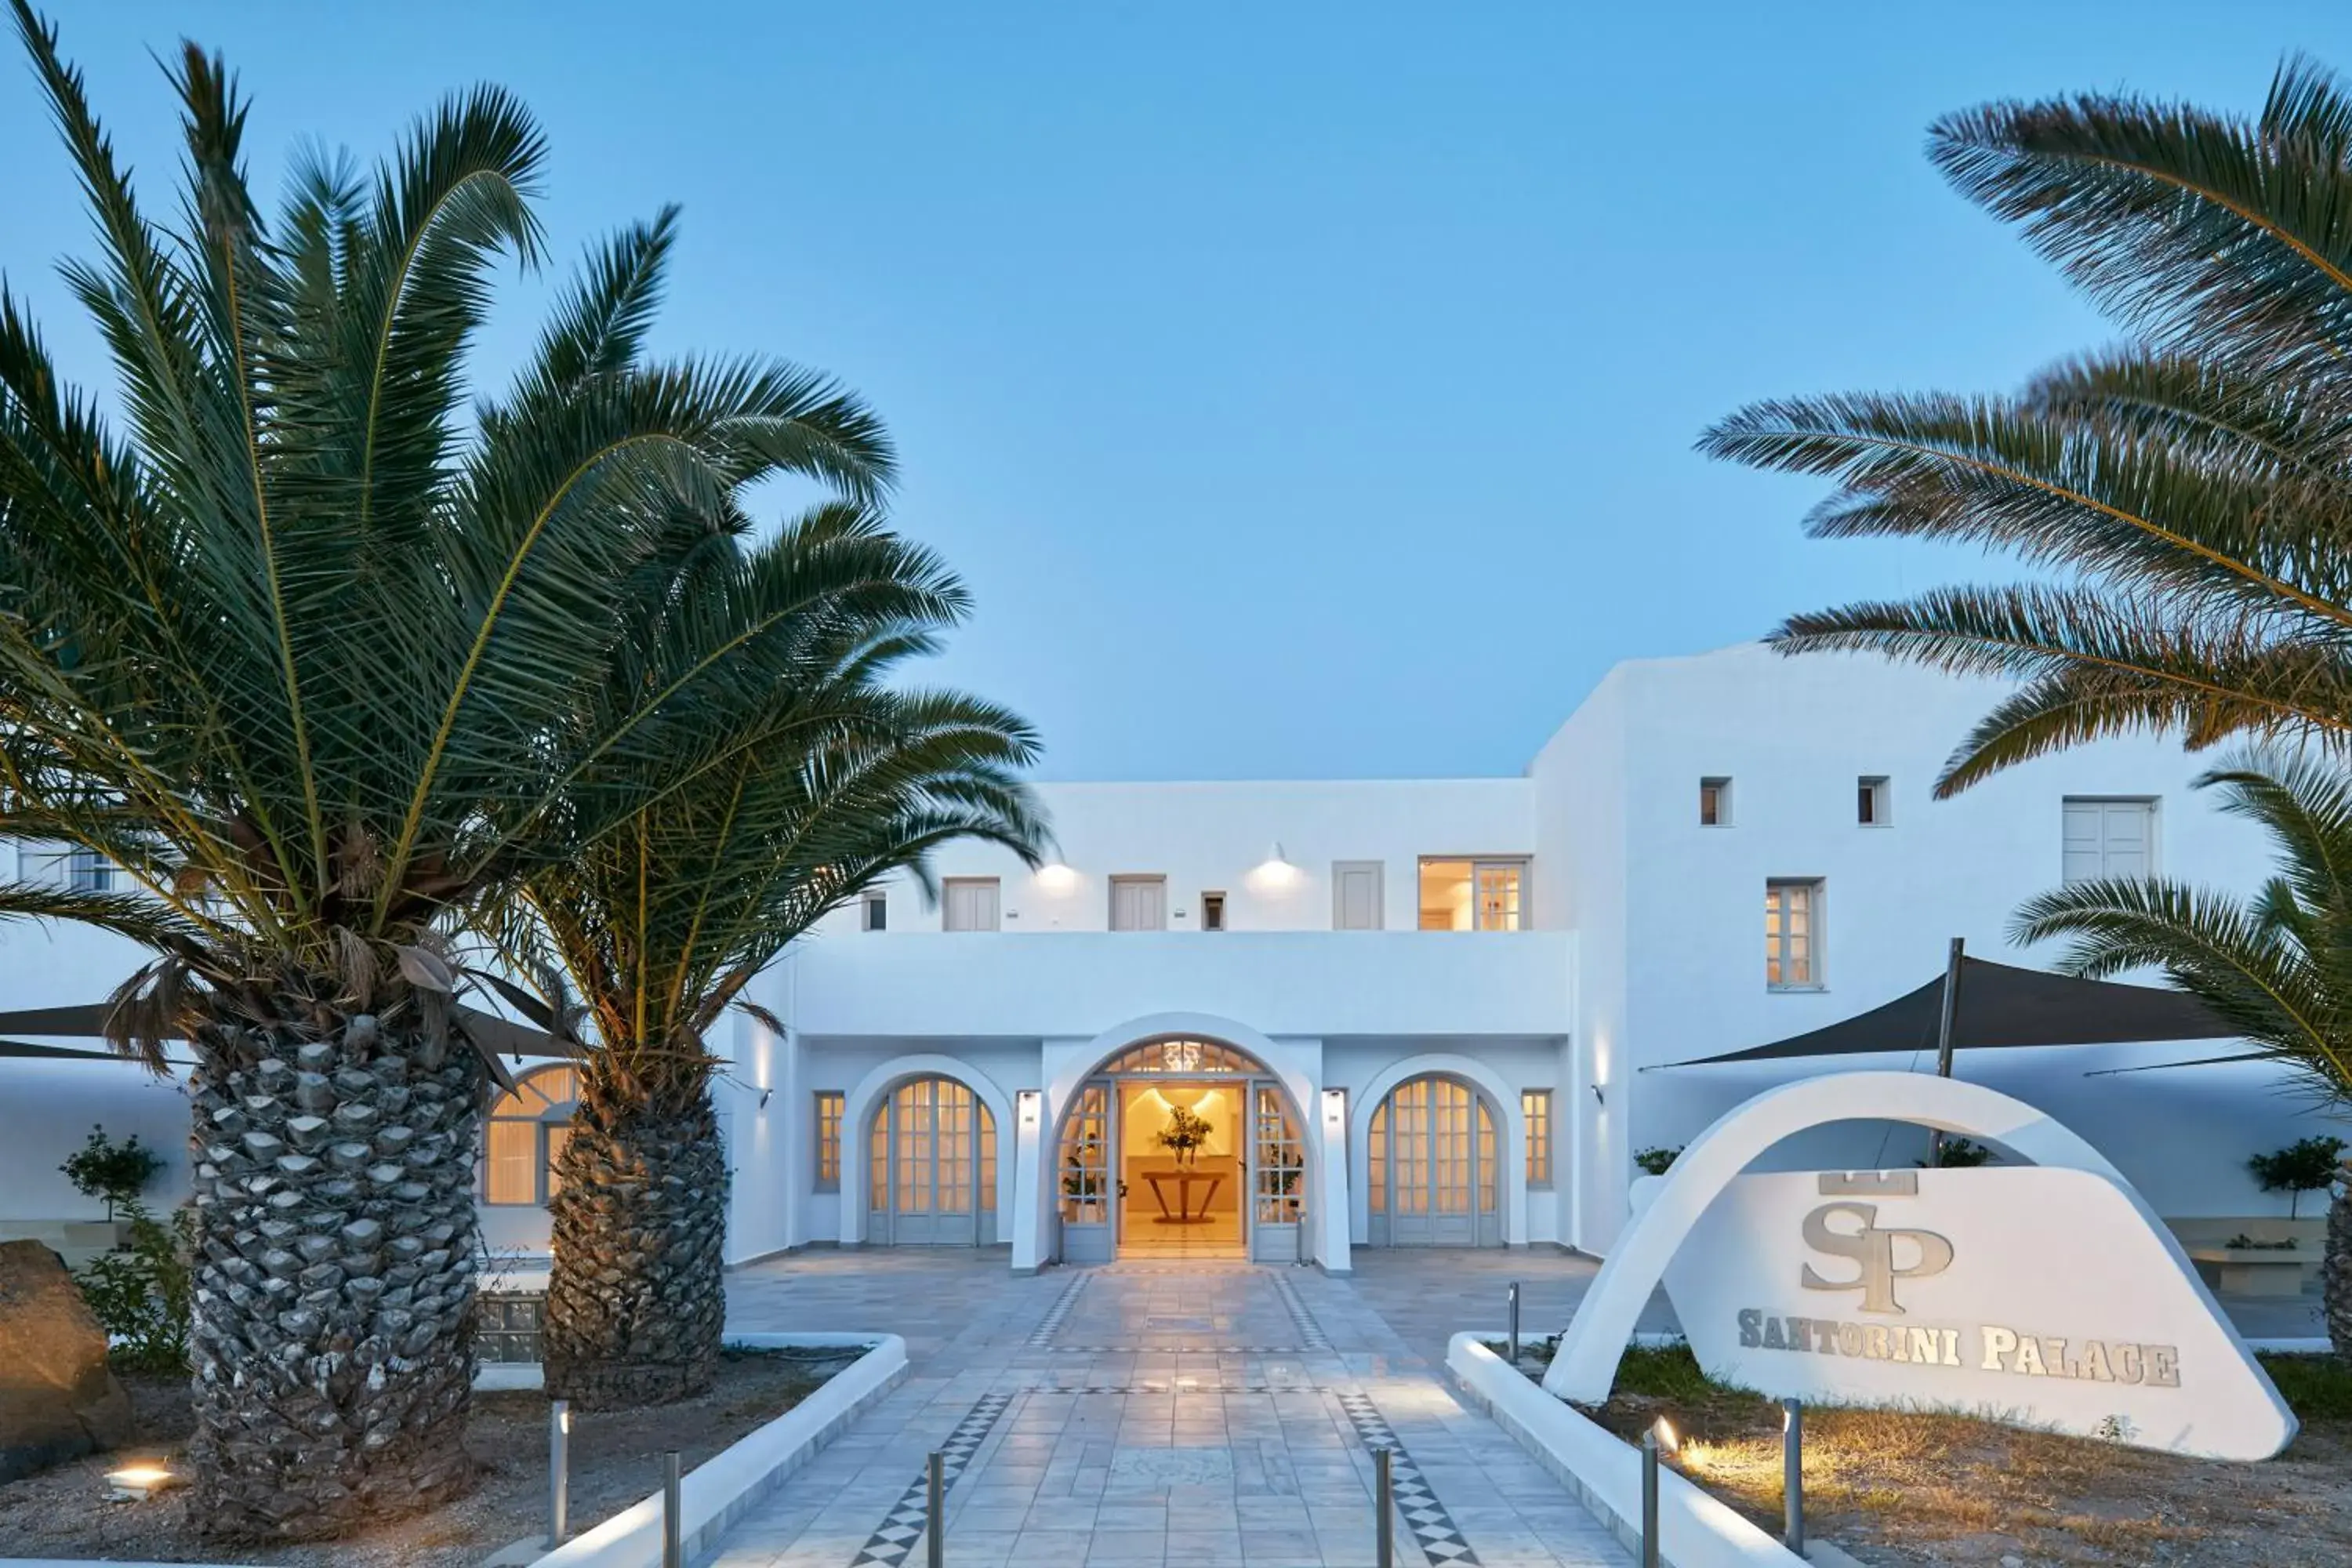 Property building in Santorini Palace